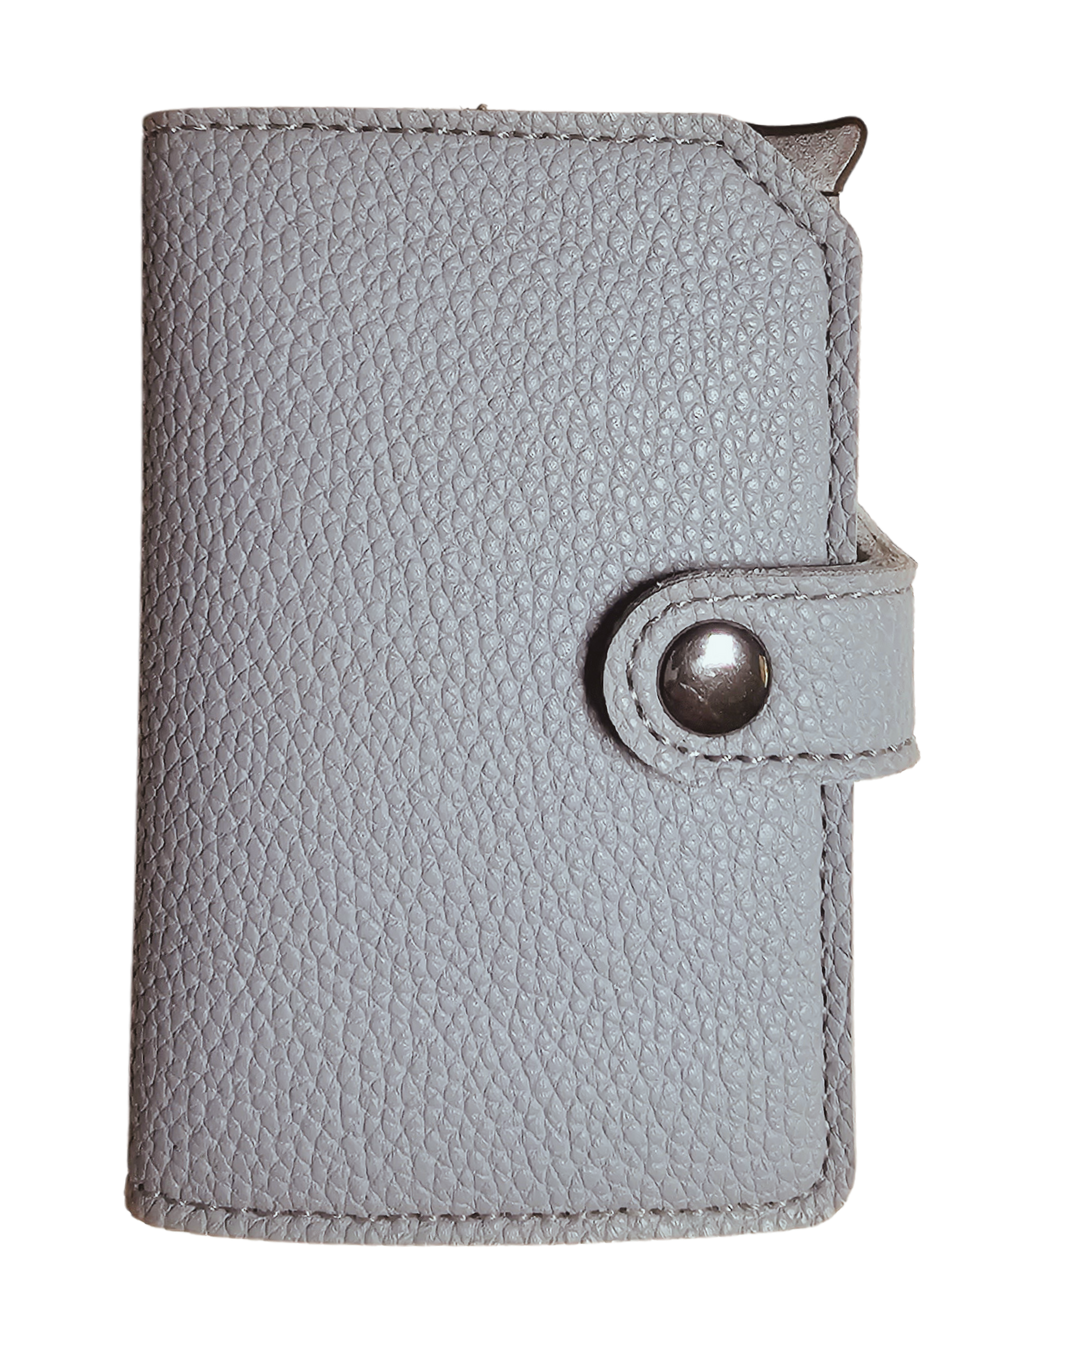 image of blue RIFD wallet. the wallets comes in either blue or black. the blue is light blue.